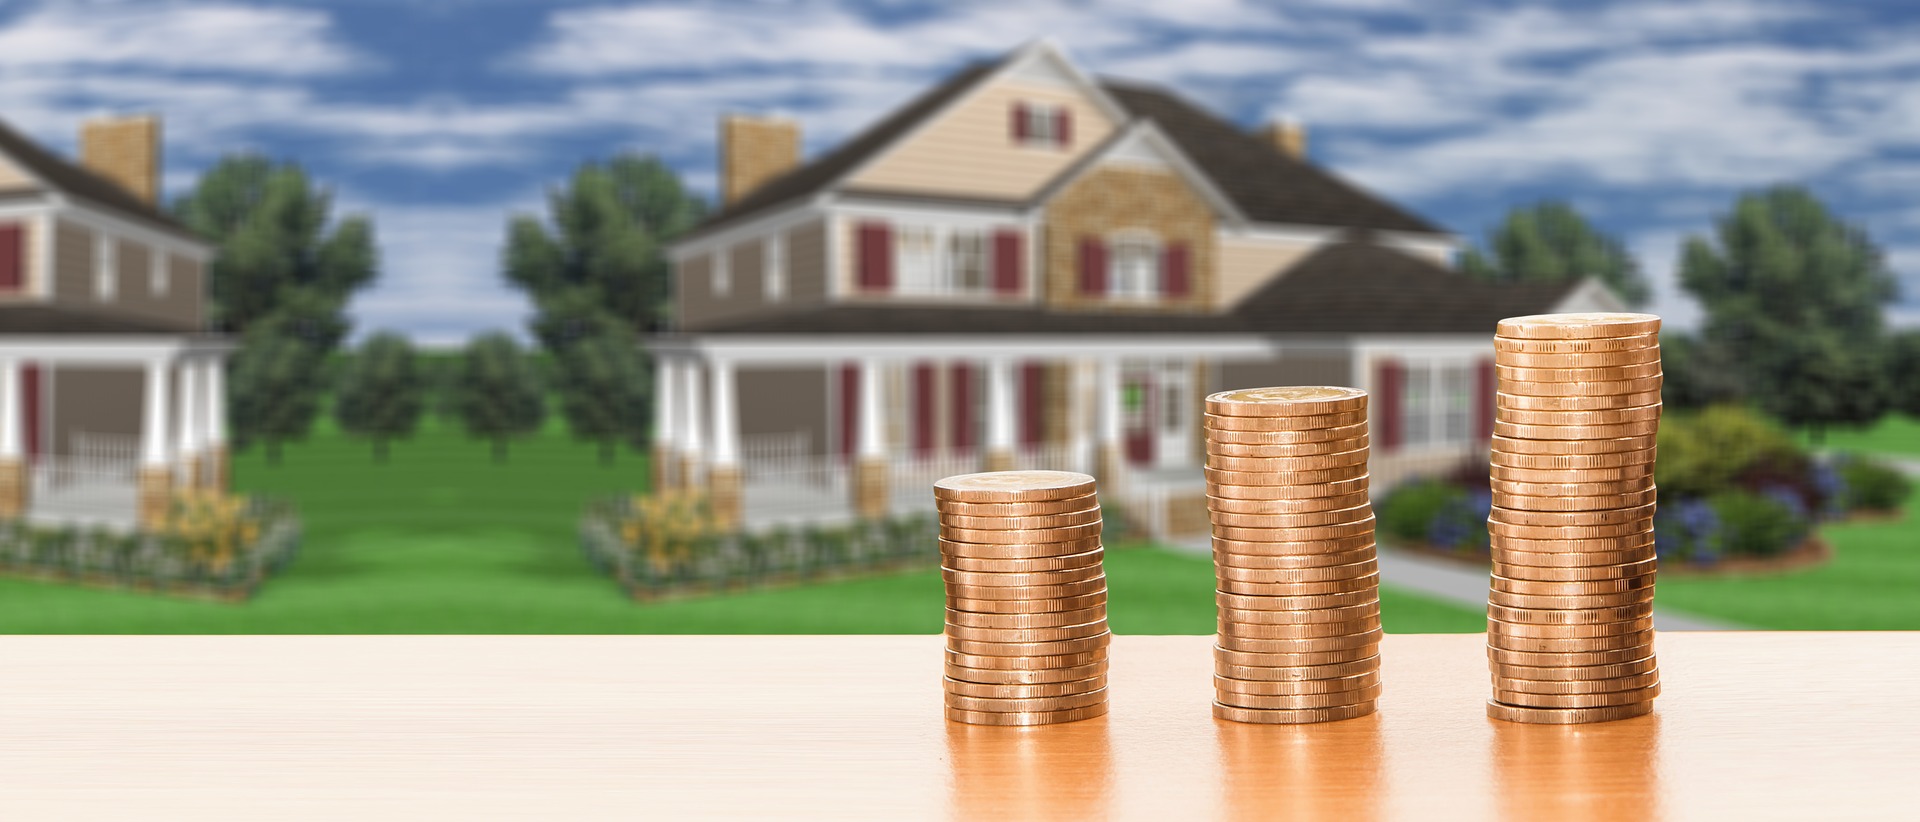 Purchasing A Household In A Down Economy - How To Make It Correctly 2